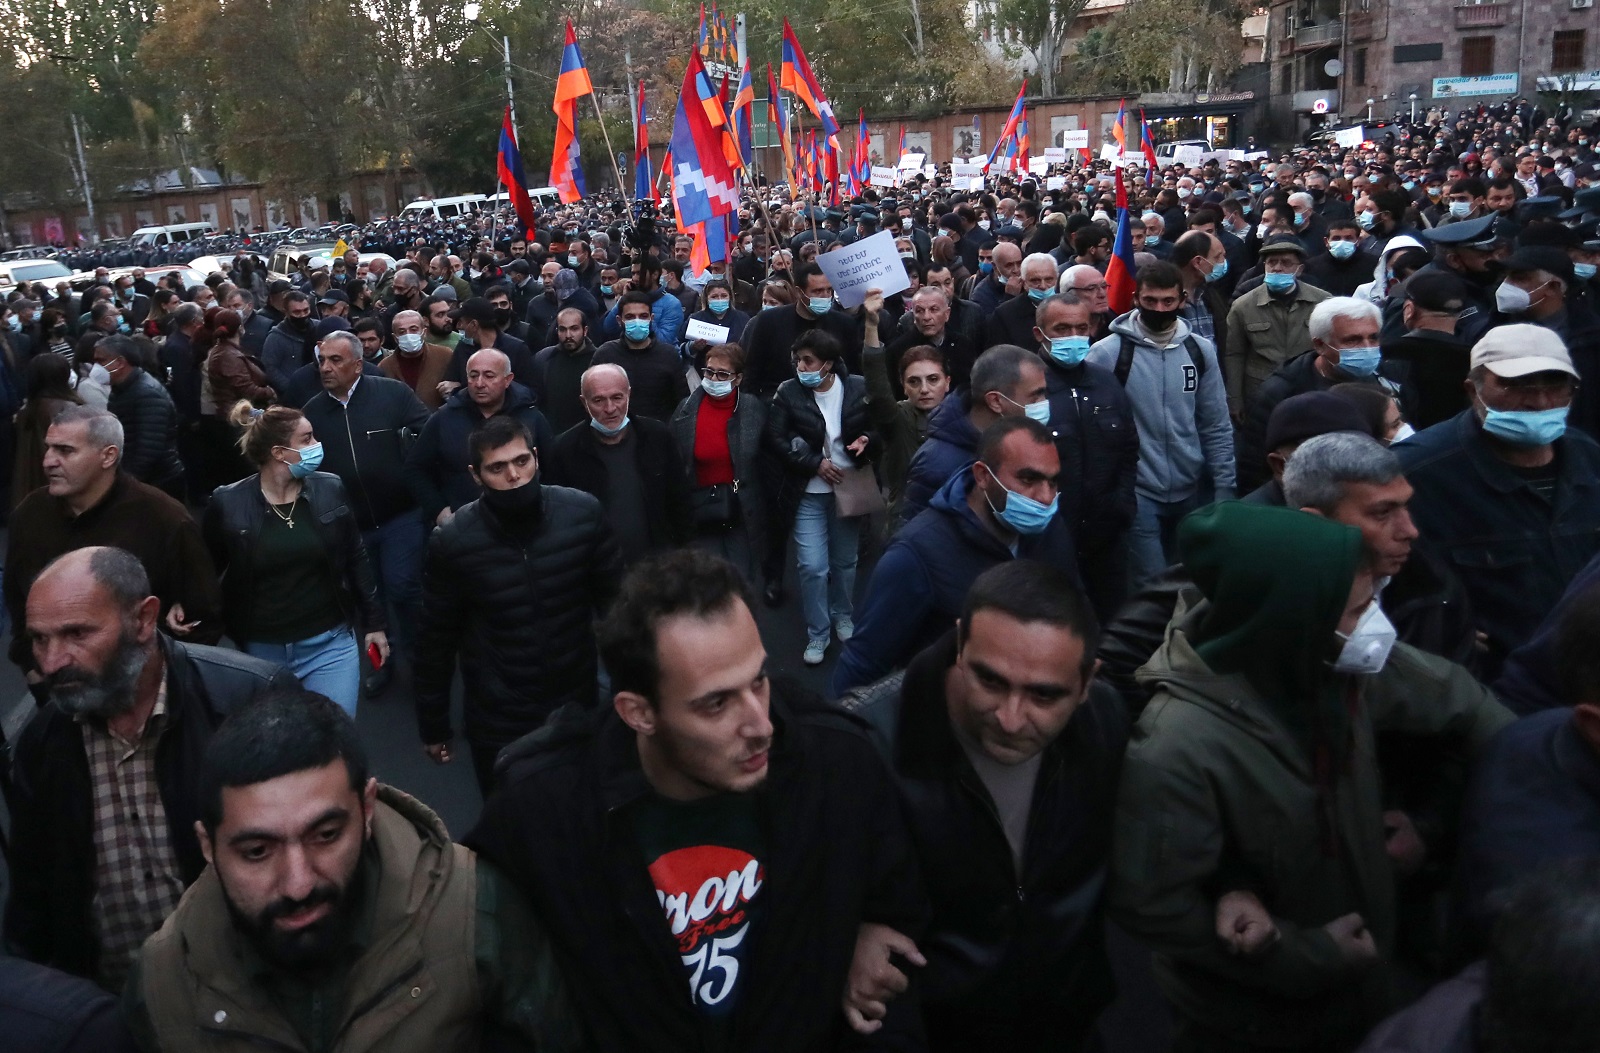 epa08816129 Armenian people attend an opposition rally in Yerevan, Armenia, 12 November 2020. Protesters  demanded the resignation of Armenian Prime Minister Nikol Pashinyan and his government. The unrest  and protest erupted in Yerevan on 10 November 2020 after Armenian Prime Minister and Presidents of Azerbaijan and Russia signed a trilateral statement announcing the halt of ceasefire and all military operations in the Nagorno-Karabakh conflict zone.  EPA/VAHRAM BAGHDASARYAN /PHOTOLURE MANDATORY CREDIT